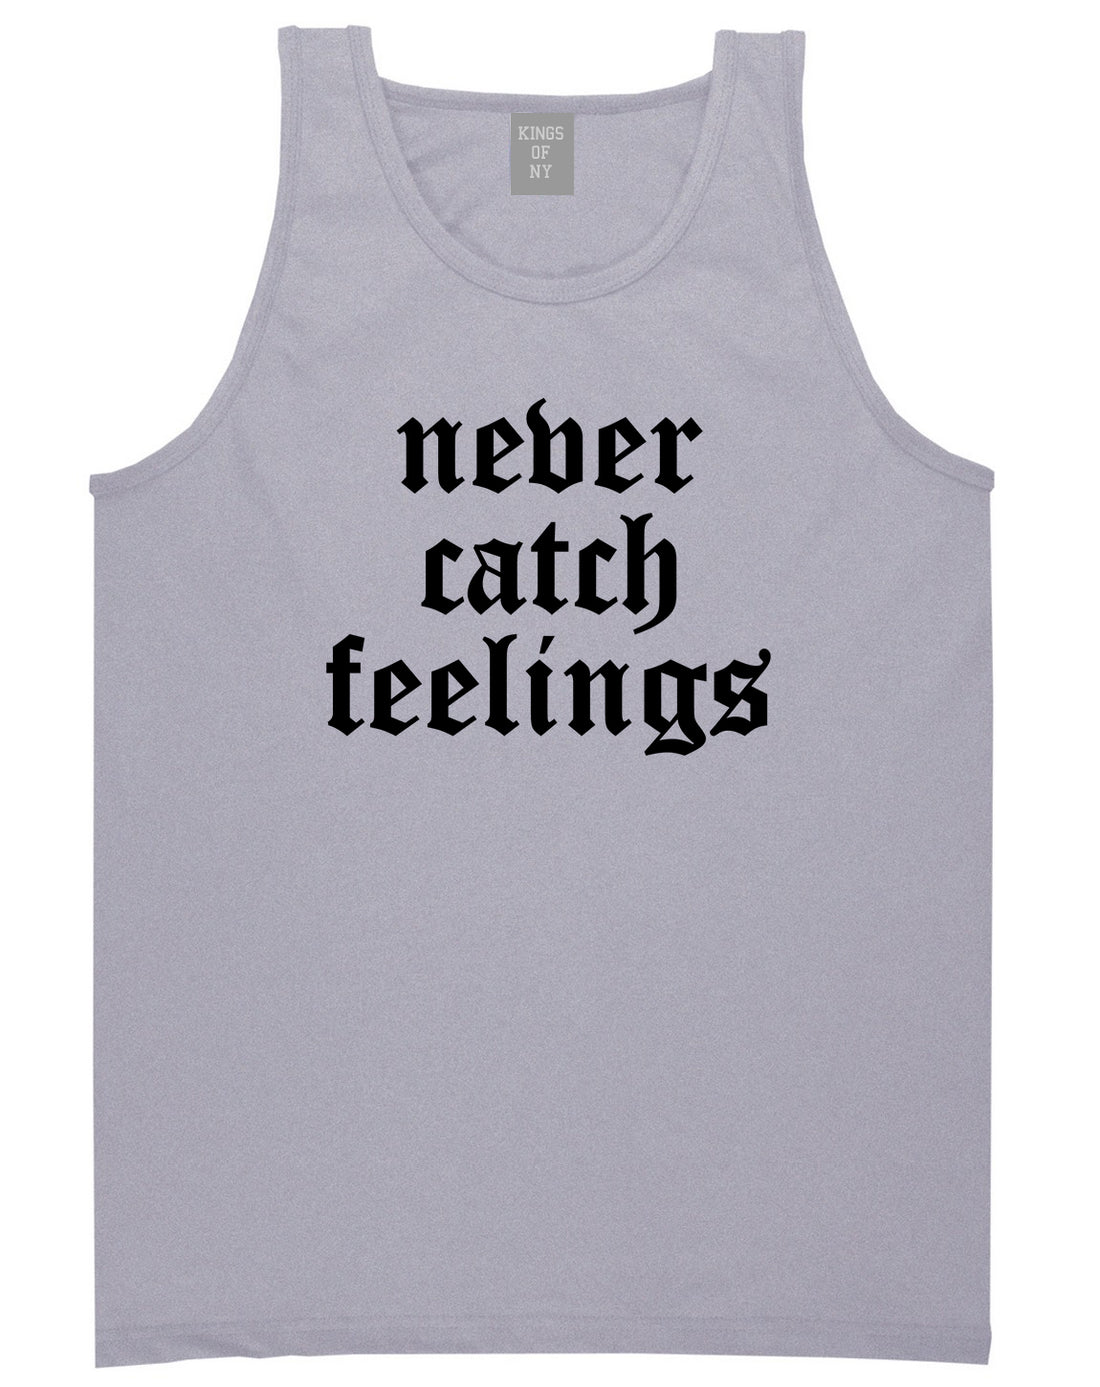 Never Catch Feelings Mens Tank Top Shirt Grey by Kings Of NY